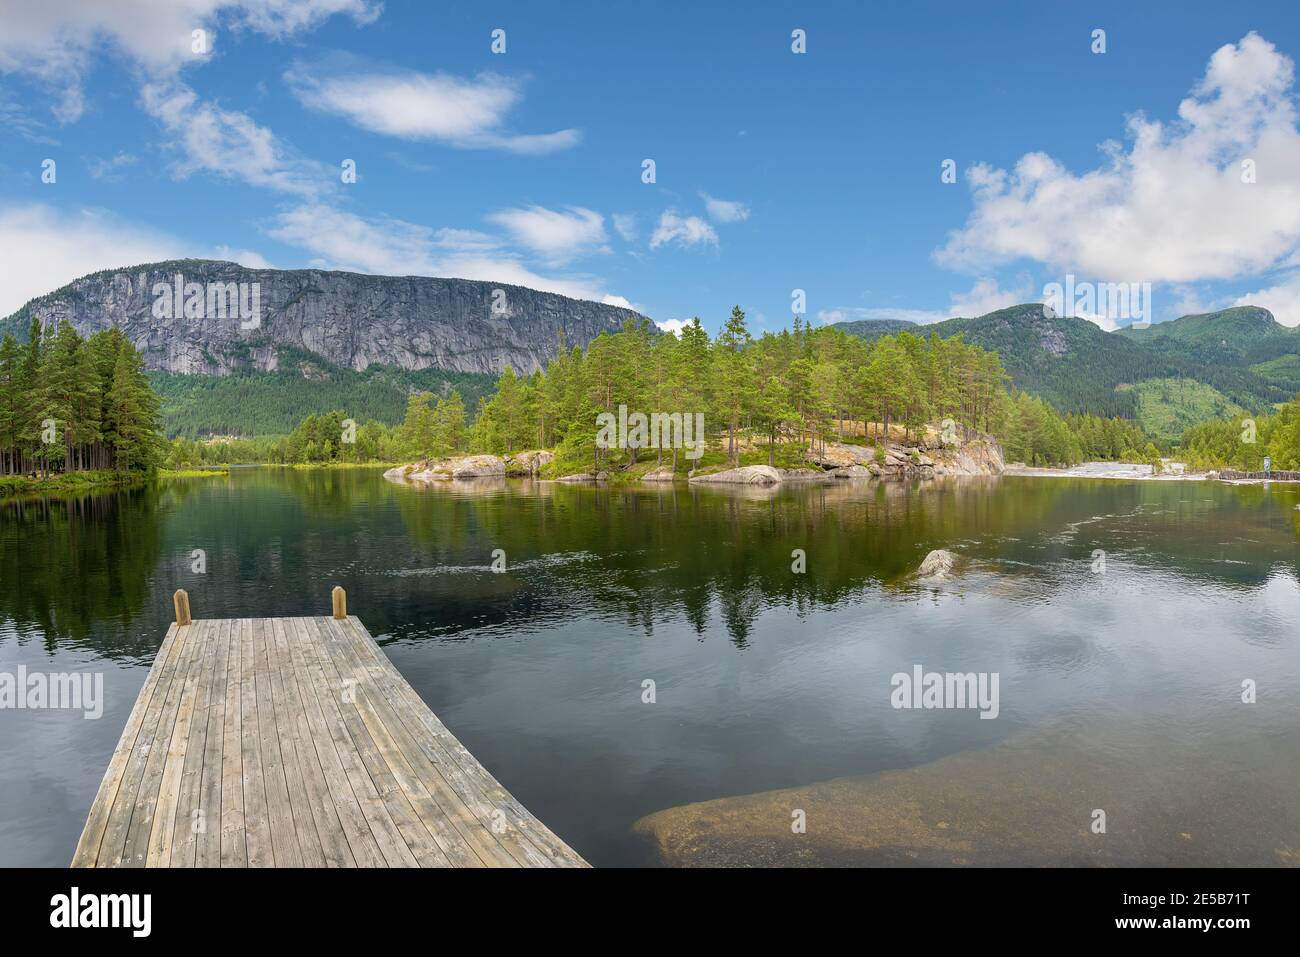 A view of mountains, water and forests in Norway. Stock Photo